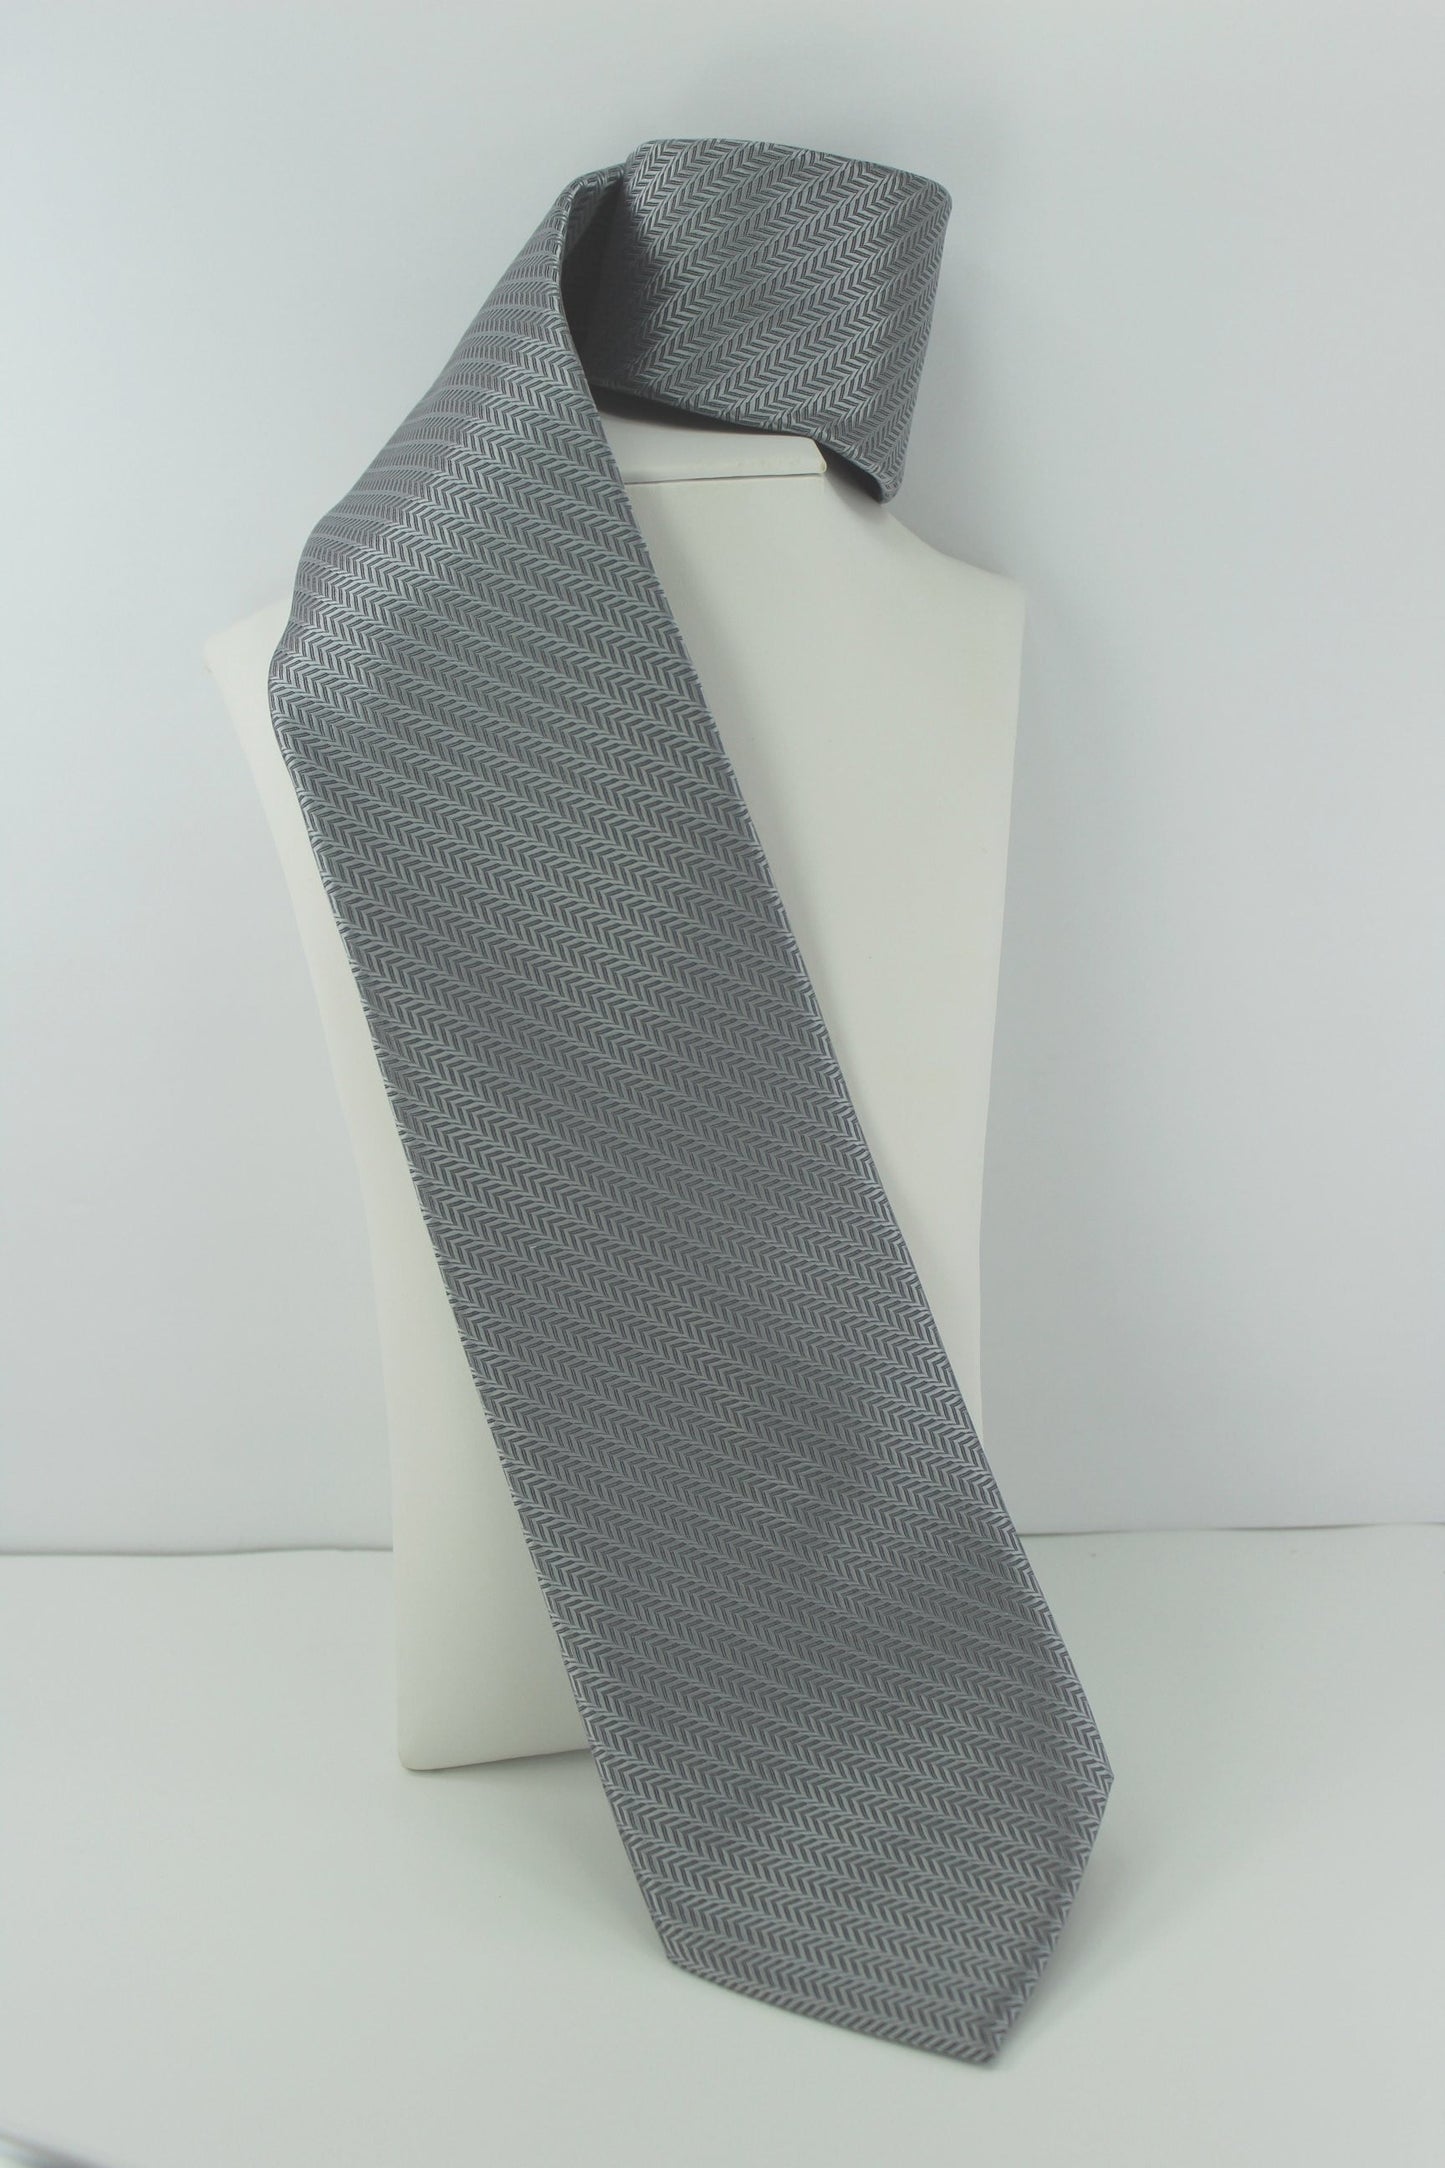 Puritan 2 Polyester Ties - Classic Small Chevron &  Optical Print Shades of Grey office zoom ties